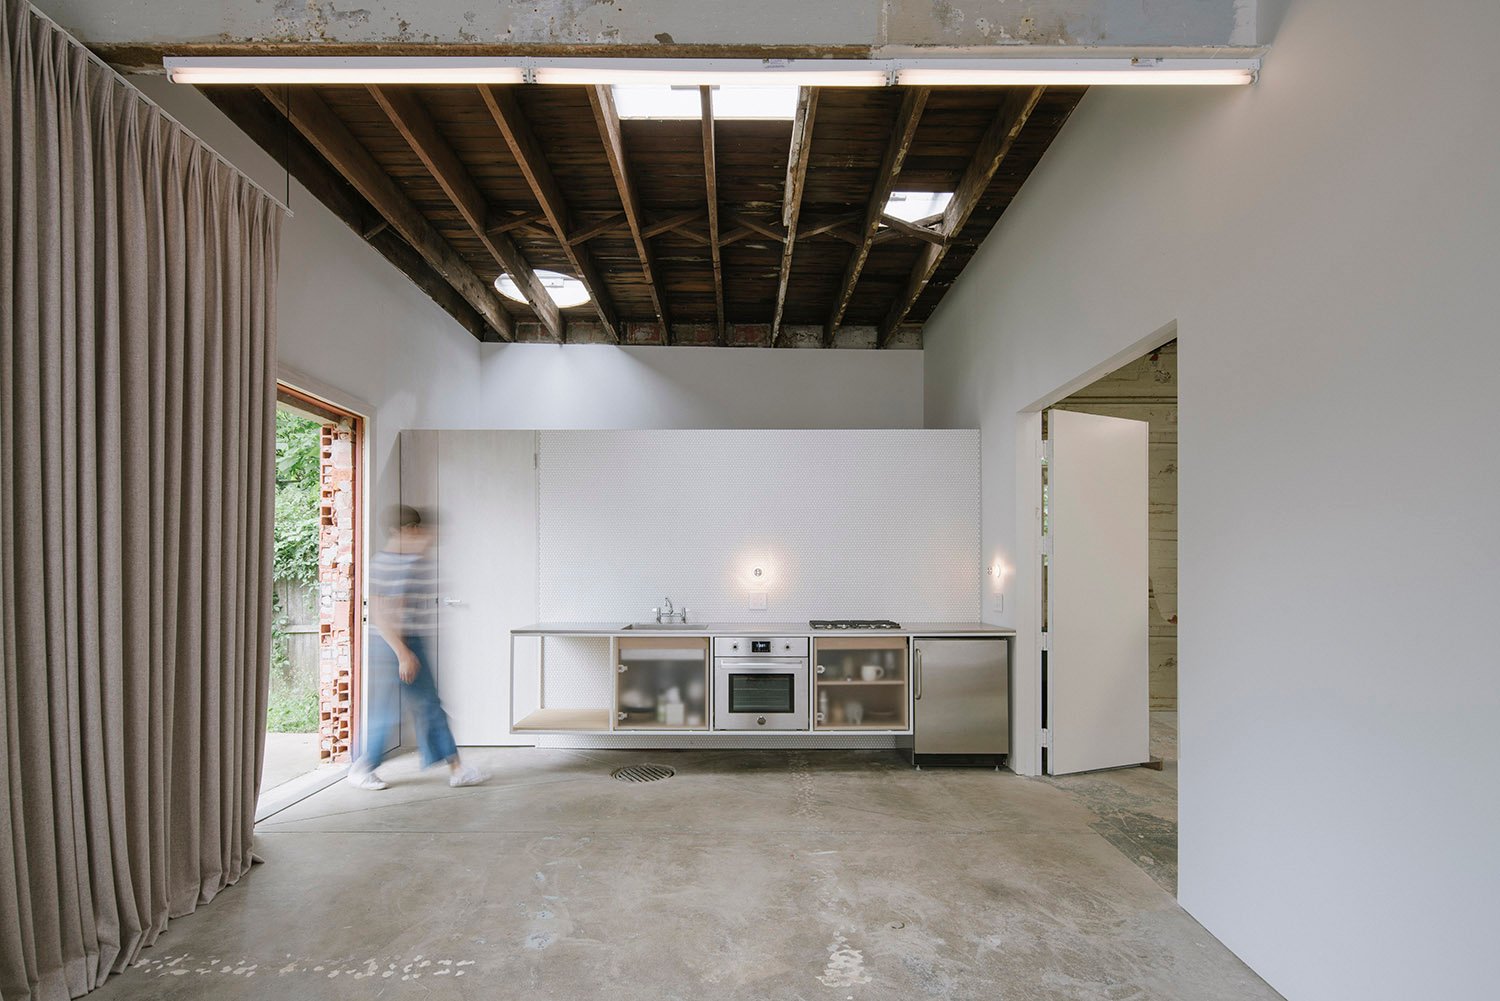 Photograph showing the infrastructure zone for the small space - a wall-hung kitchen area sits directly in front of a bathroom and laundry area. The utilities are condensed into the smallest area possible | Florian Holzherr